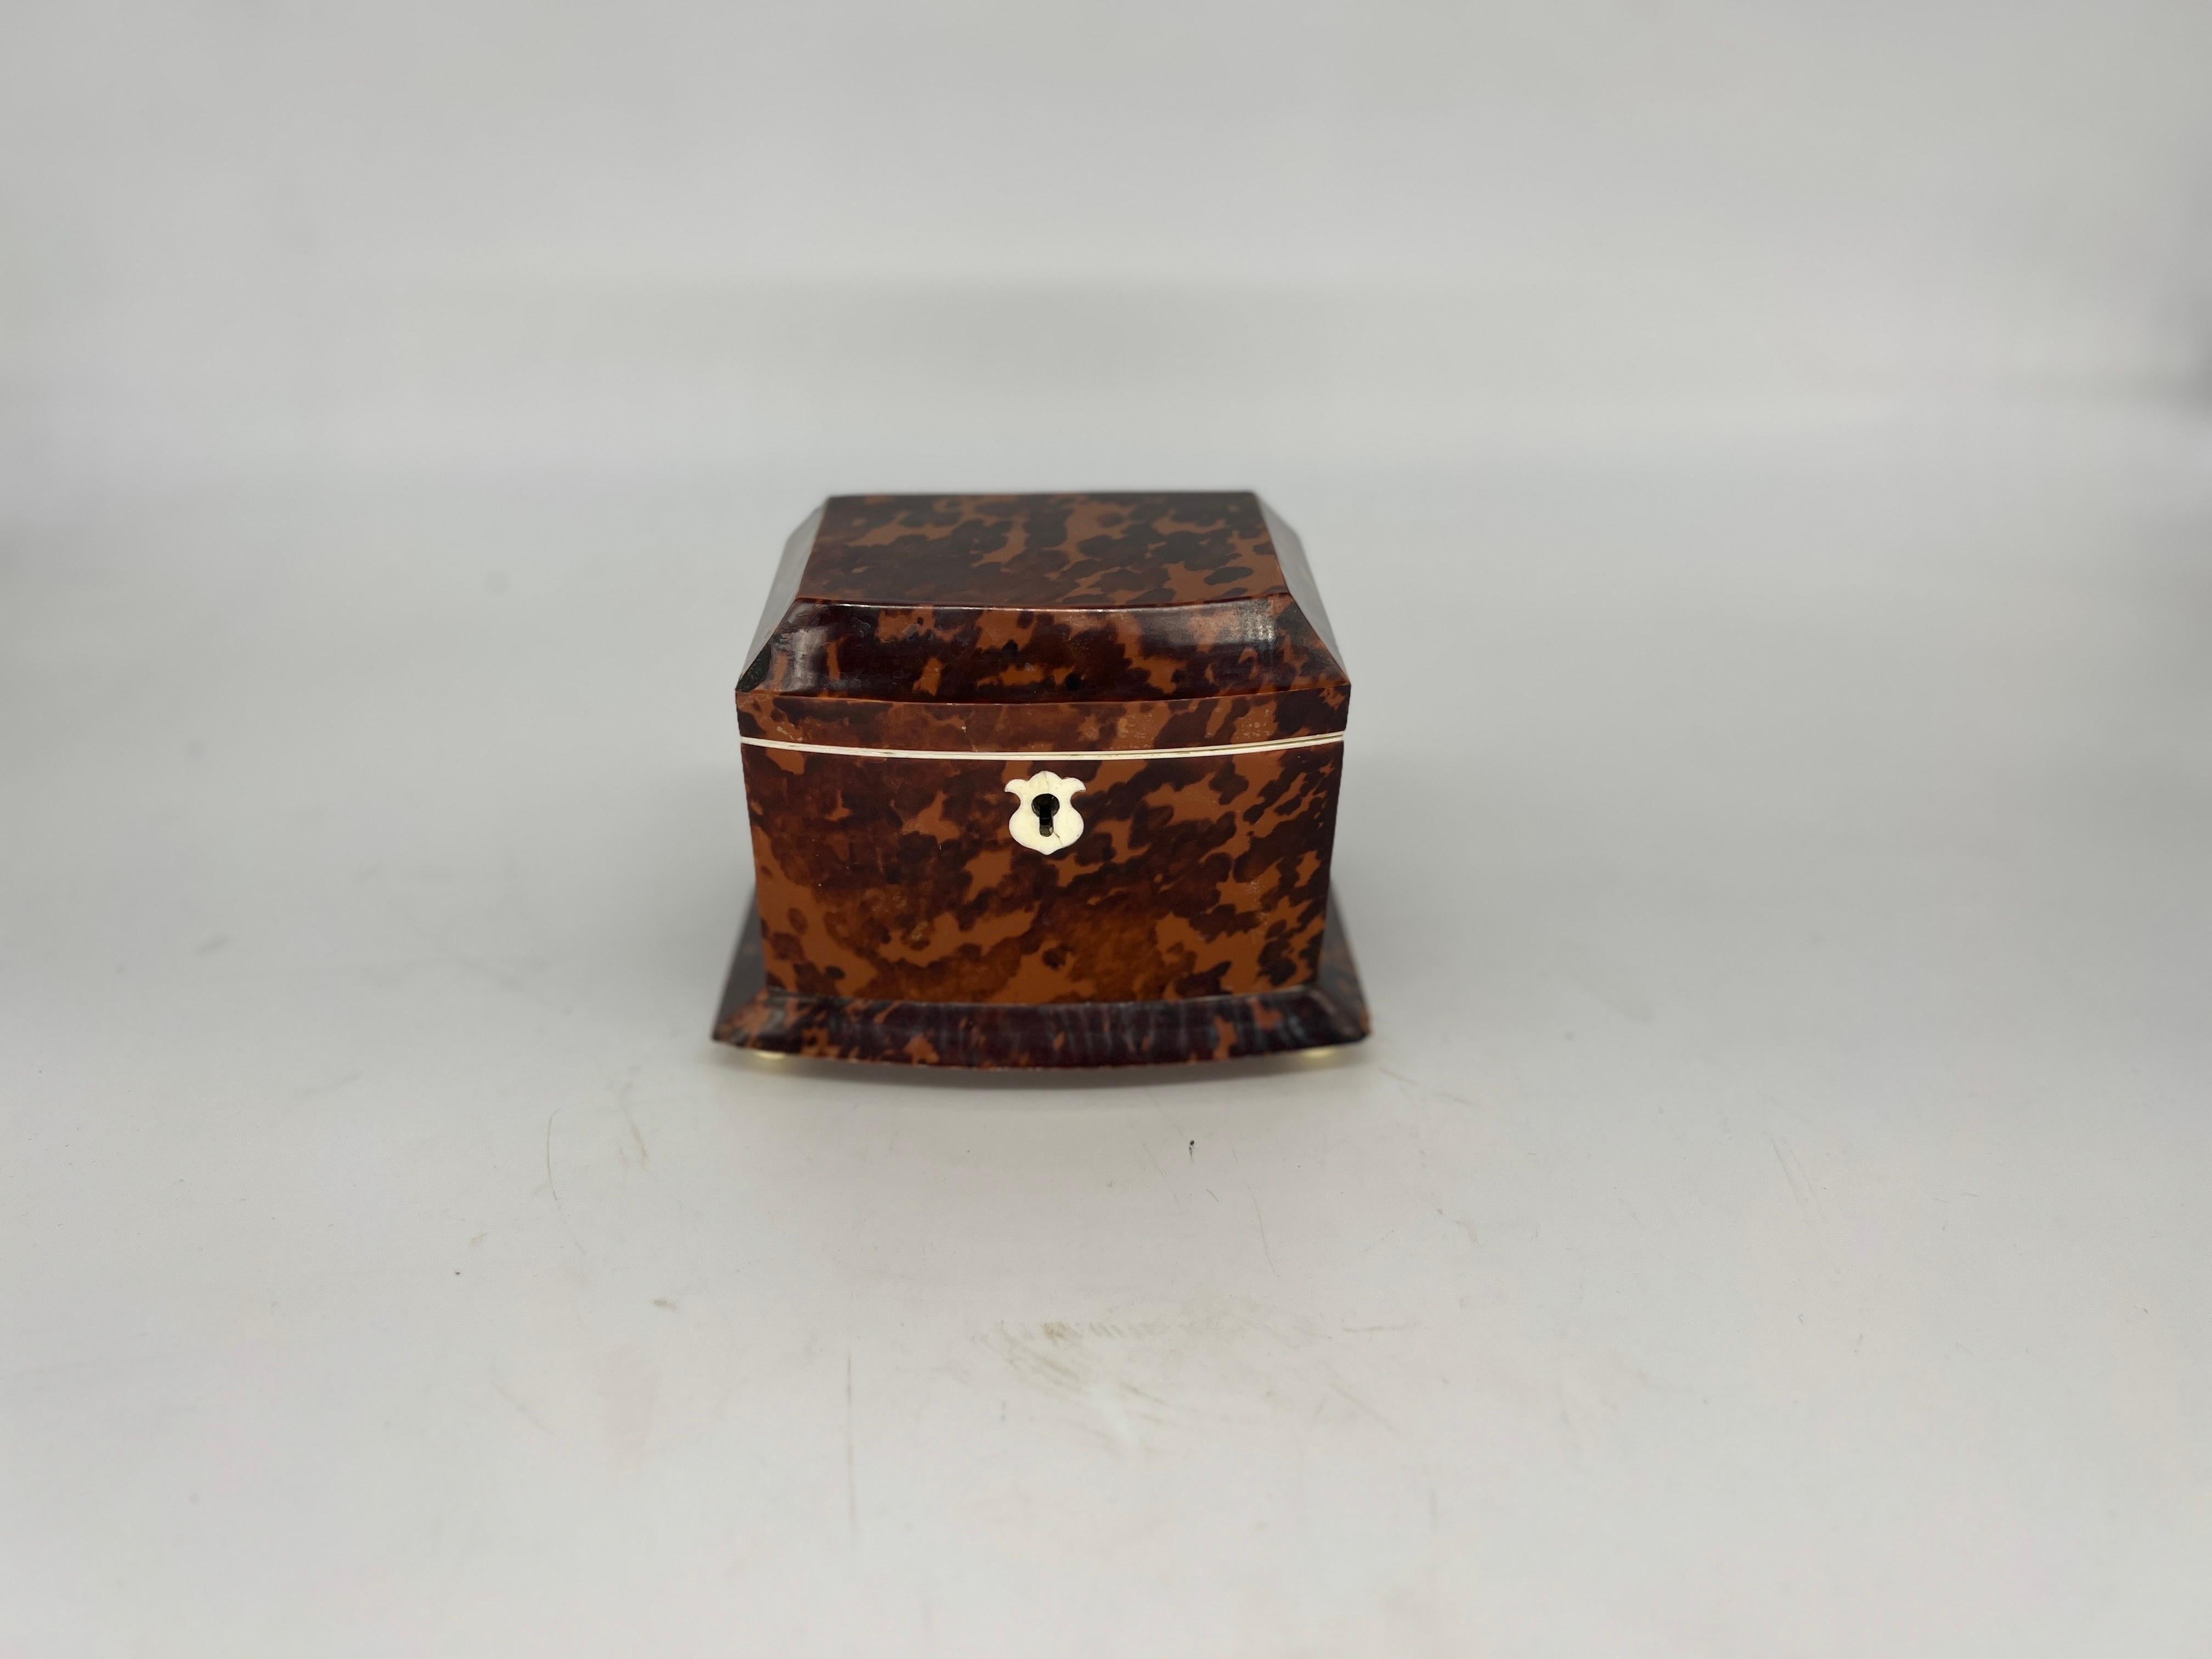 In the Georgian era tea caddies were used in every wealthy home to hold and to keep their leaves fresh. During the 19th century some of the spices and leaves were extremely expensive and hard to obtain.
Only the most well off would be able to afford